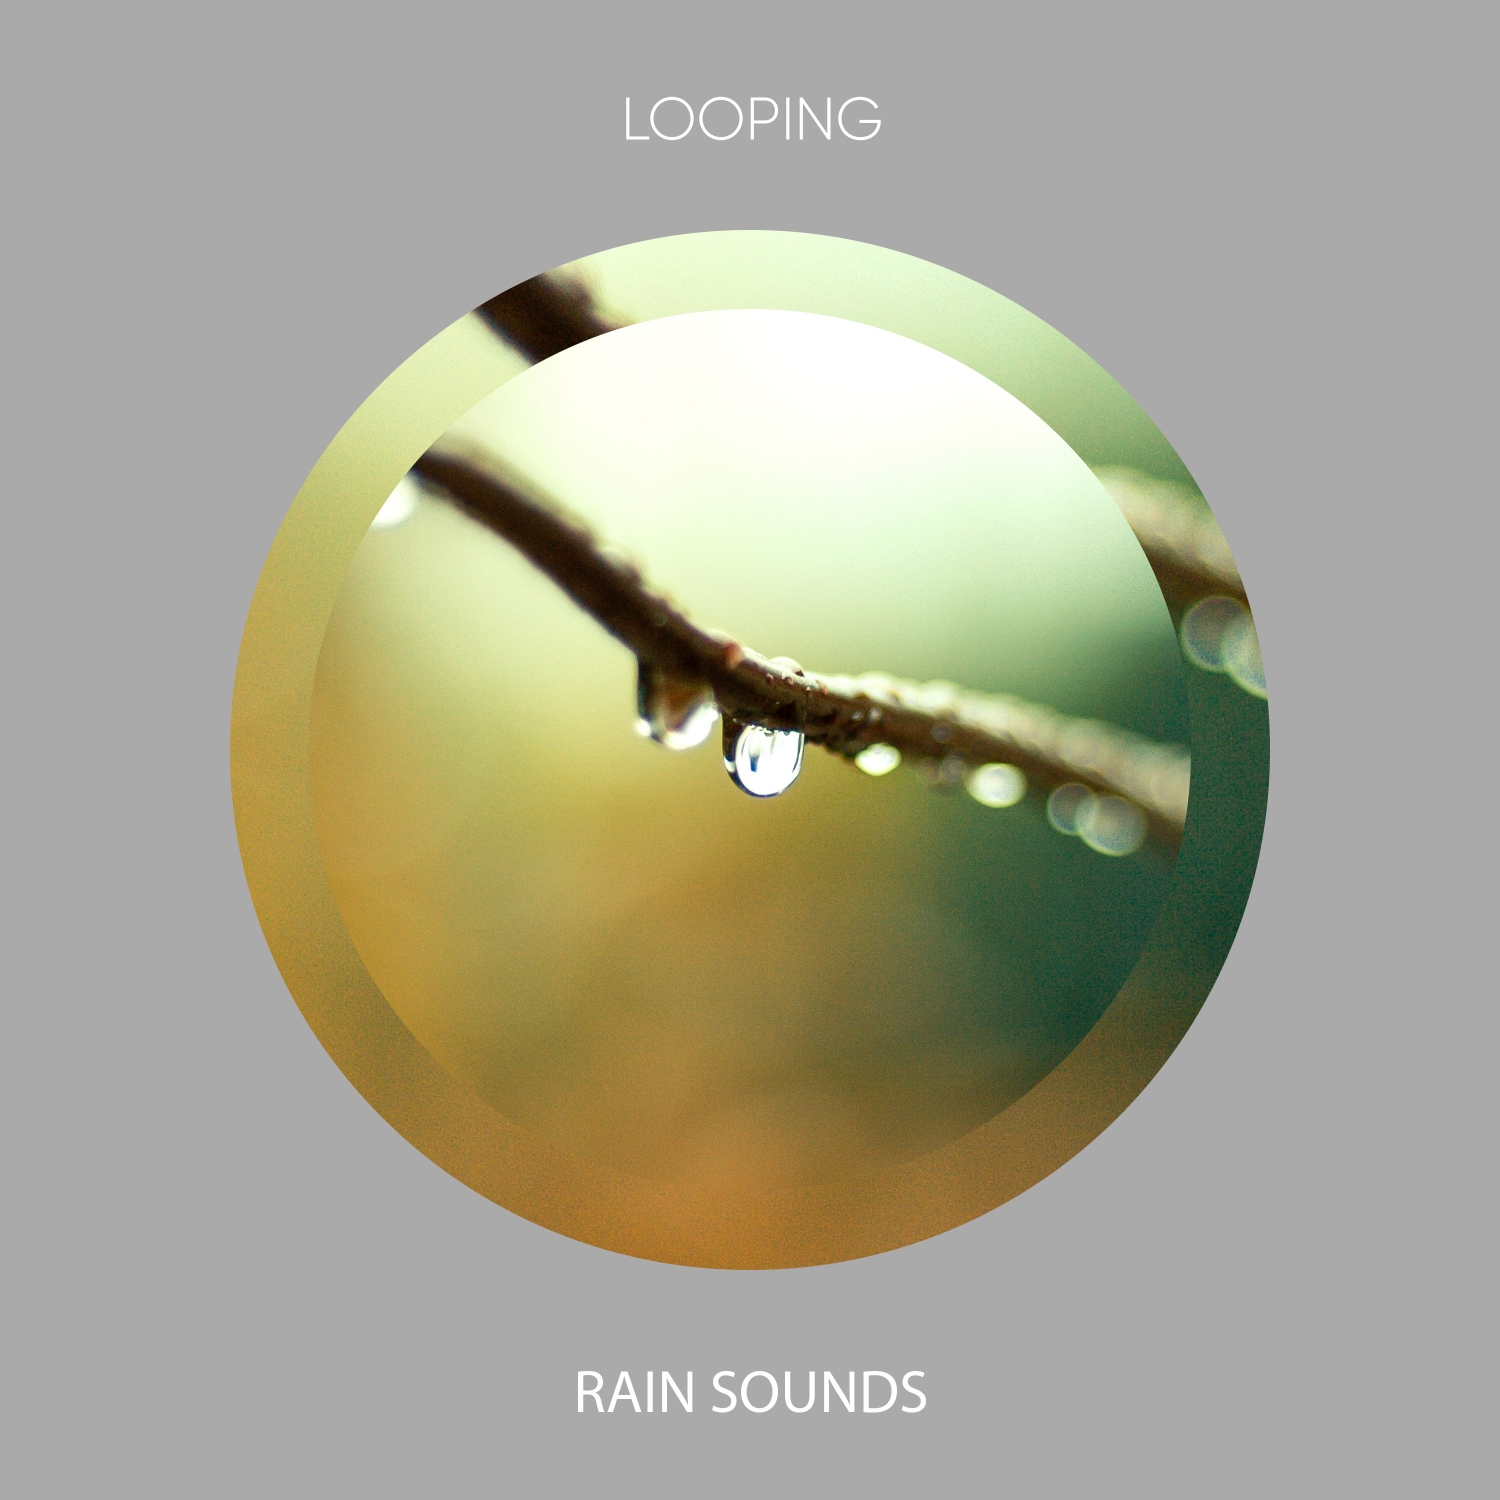 15 Looping Rain Sounds for Ultimate Relaxation